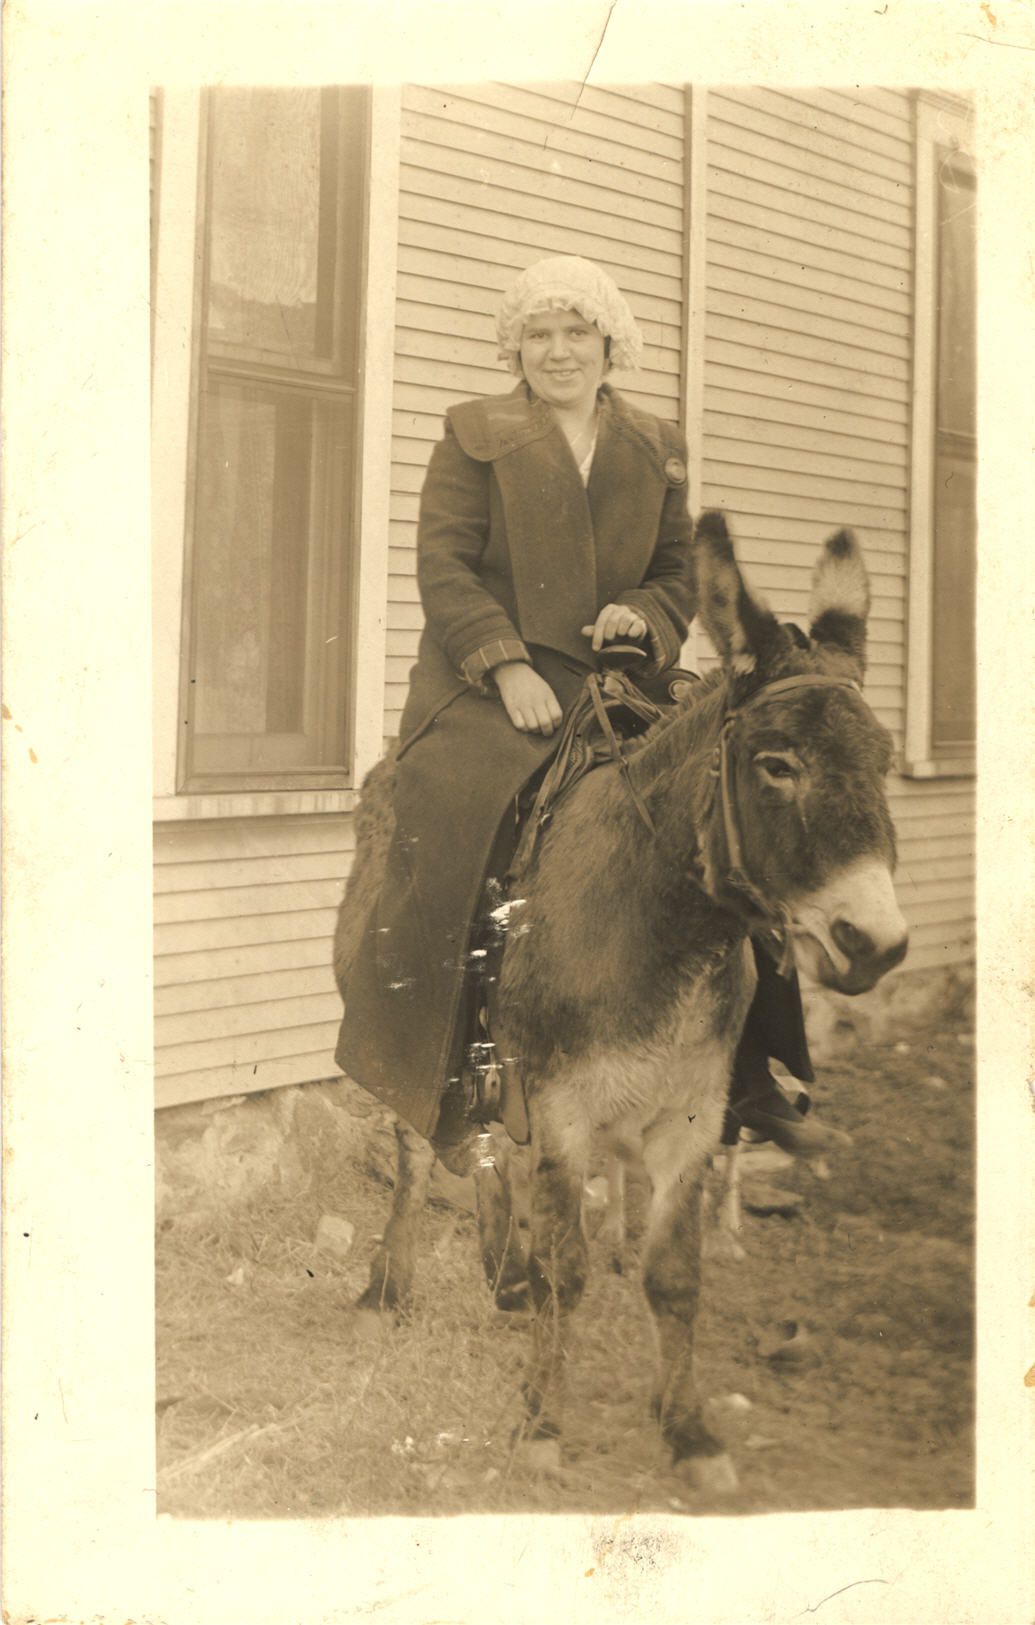 A White female nurse sitting on top of a donkey and smiling at the viewer.